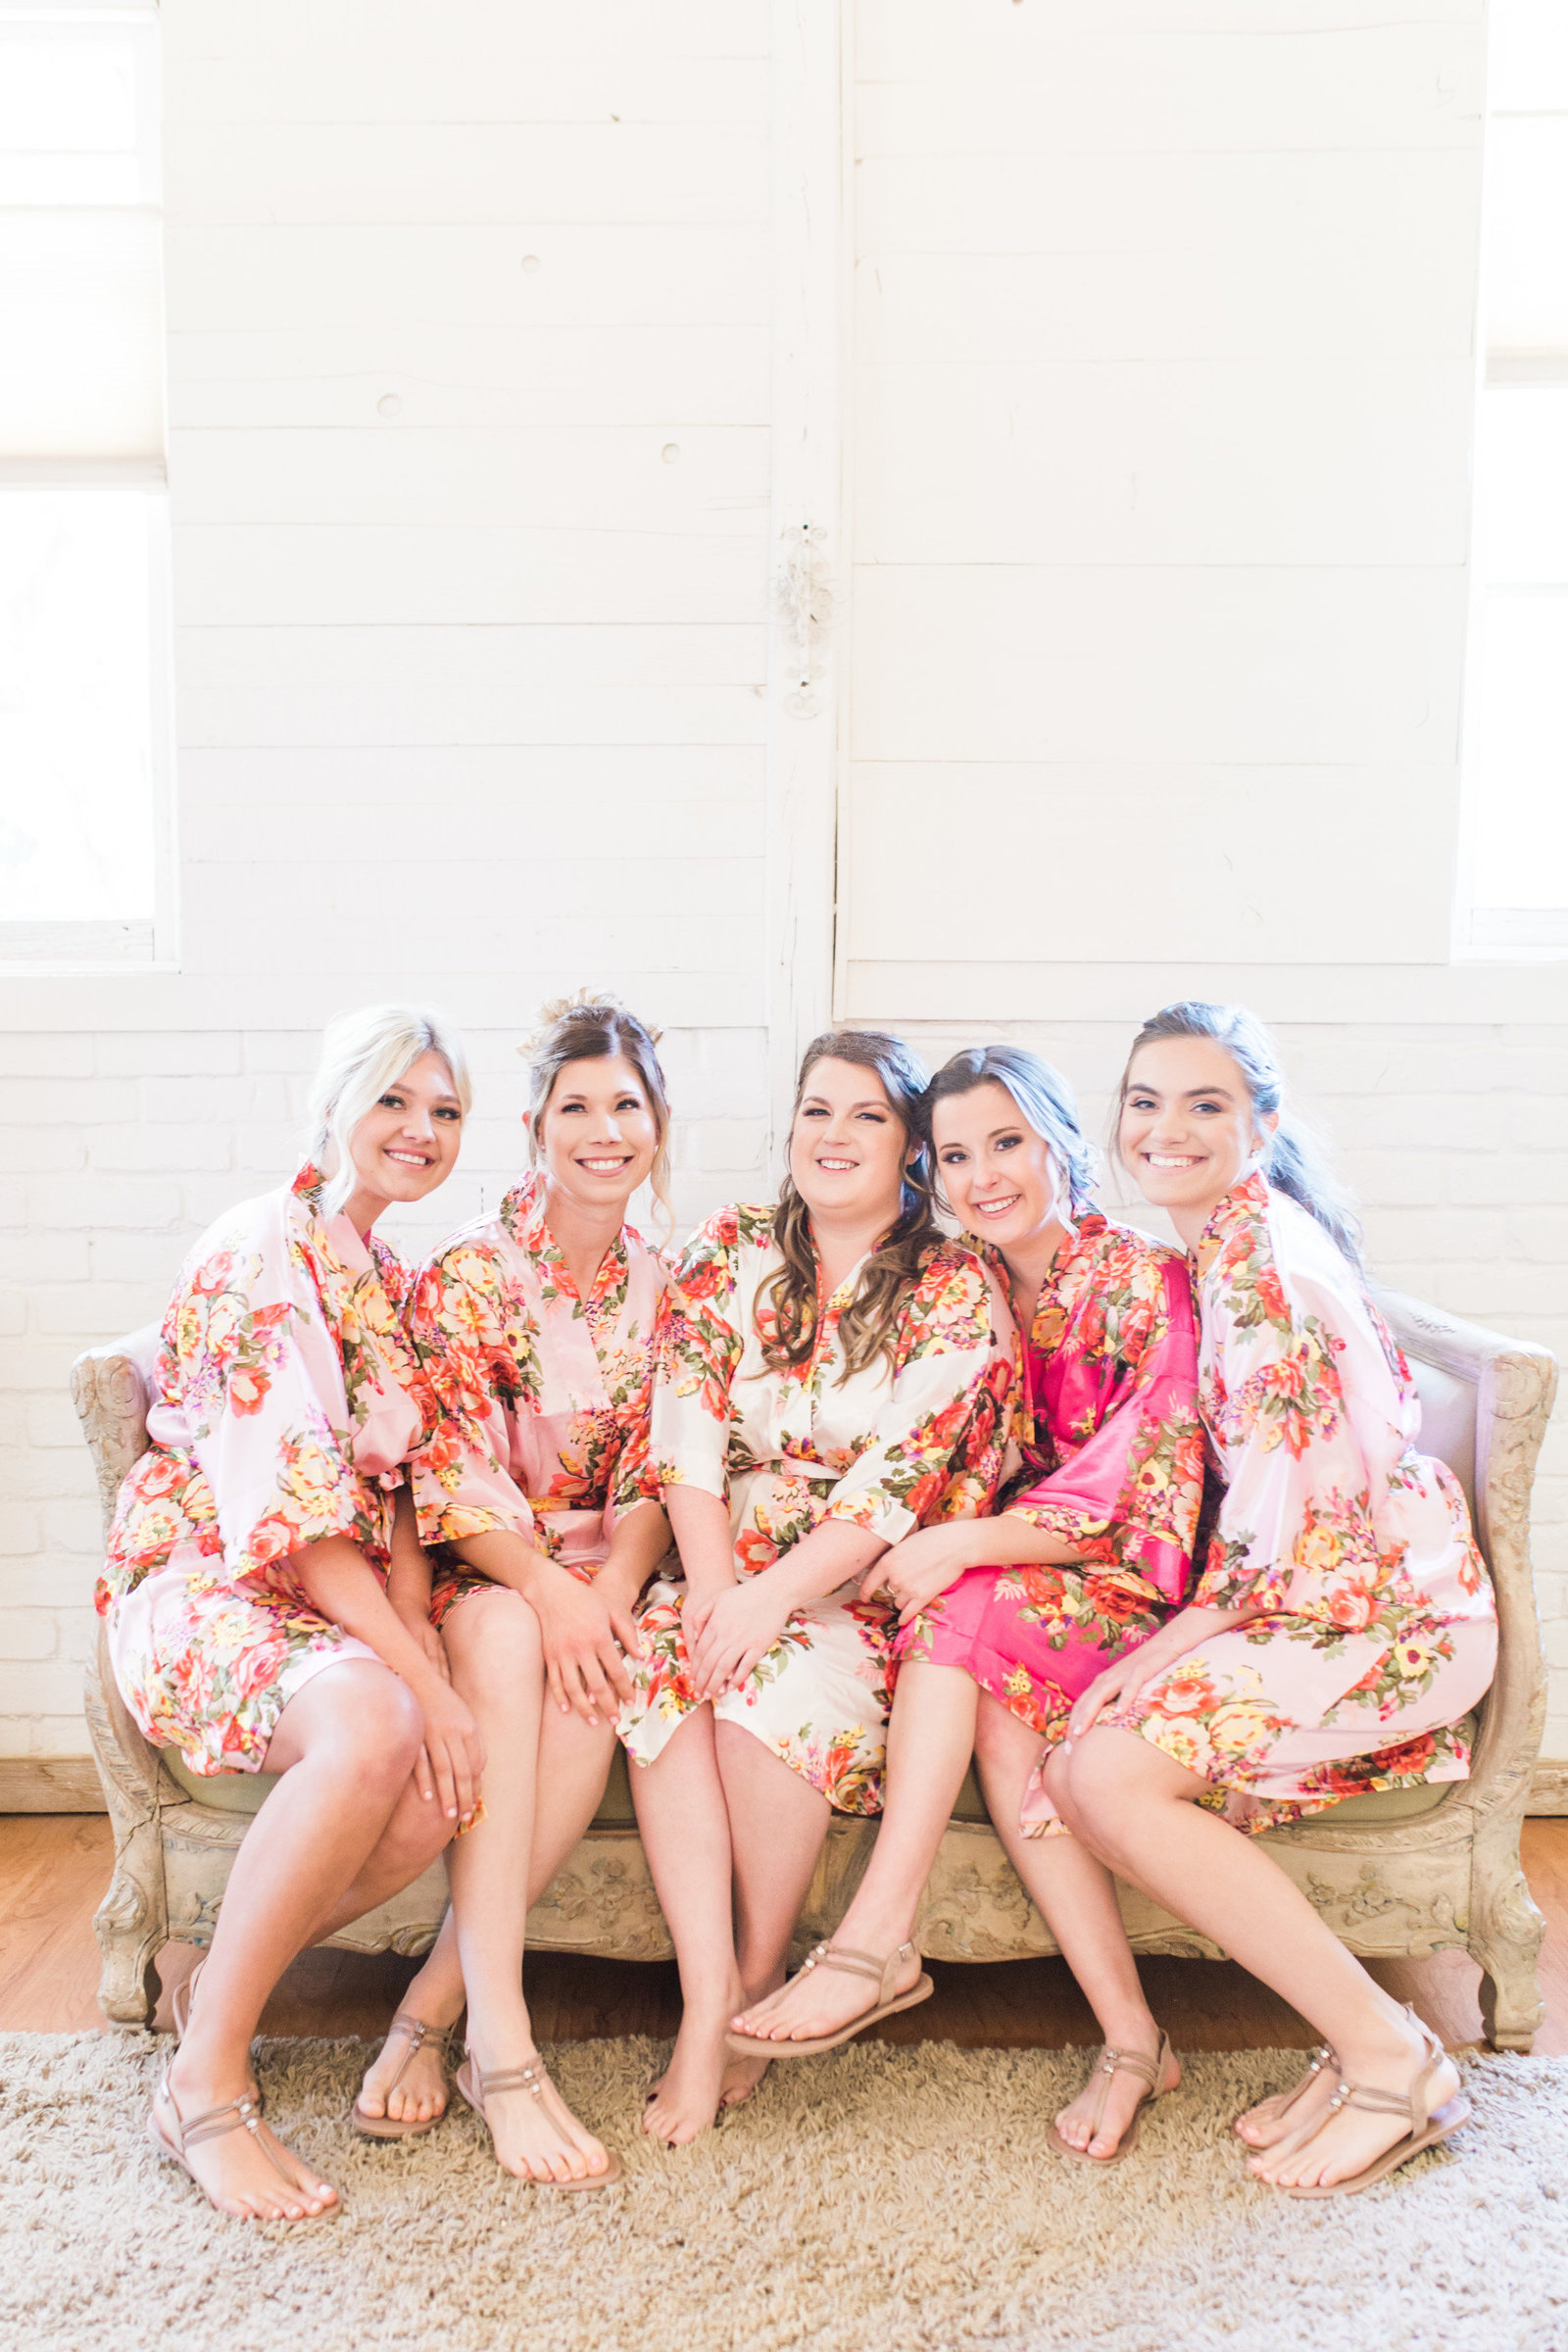 Florence Windmill Winery Blush and Pink Wedding Getting Ready Photo of Bride and Bridesmaids in Floral Robes | Tucson Wedding Photographer | West End Photography